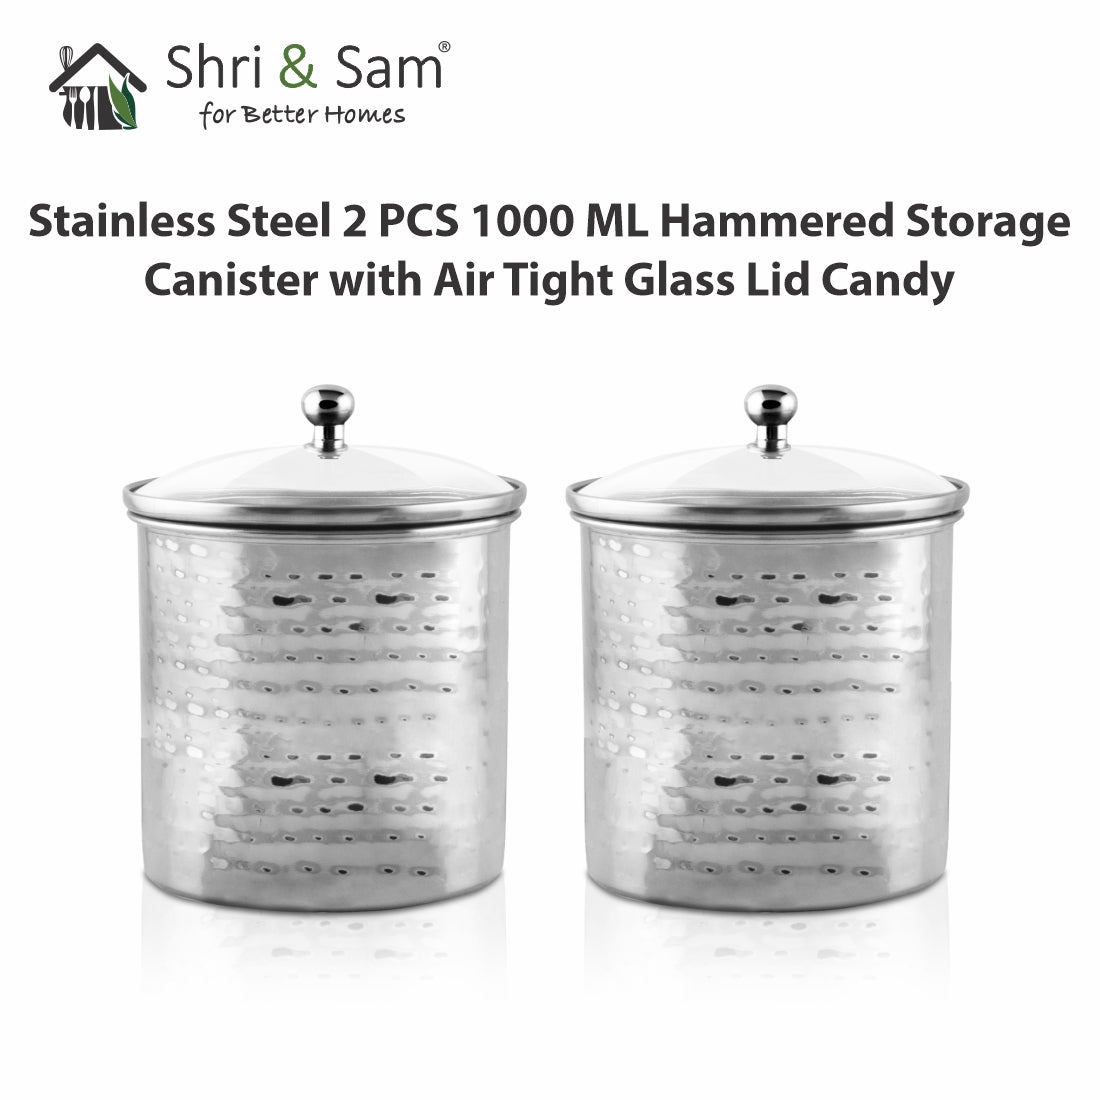 Stainless Steel 2 PCS 1000 ML Hammered Storage Canister with Air Tight Glass Lid Candy